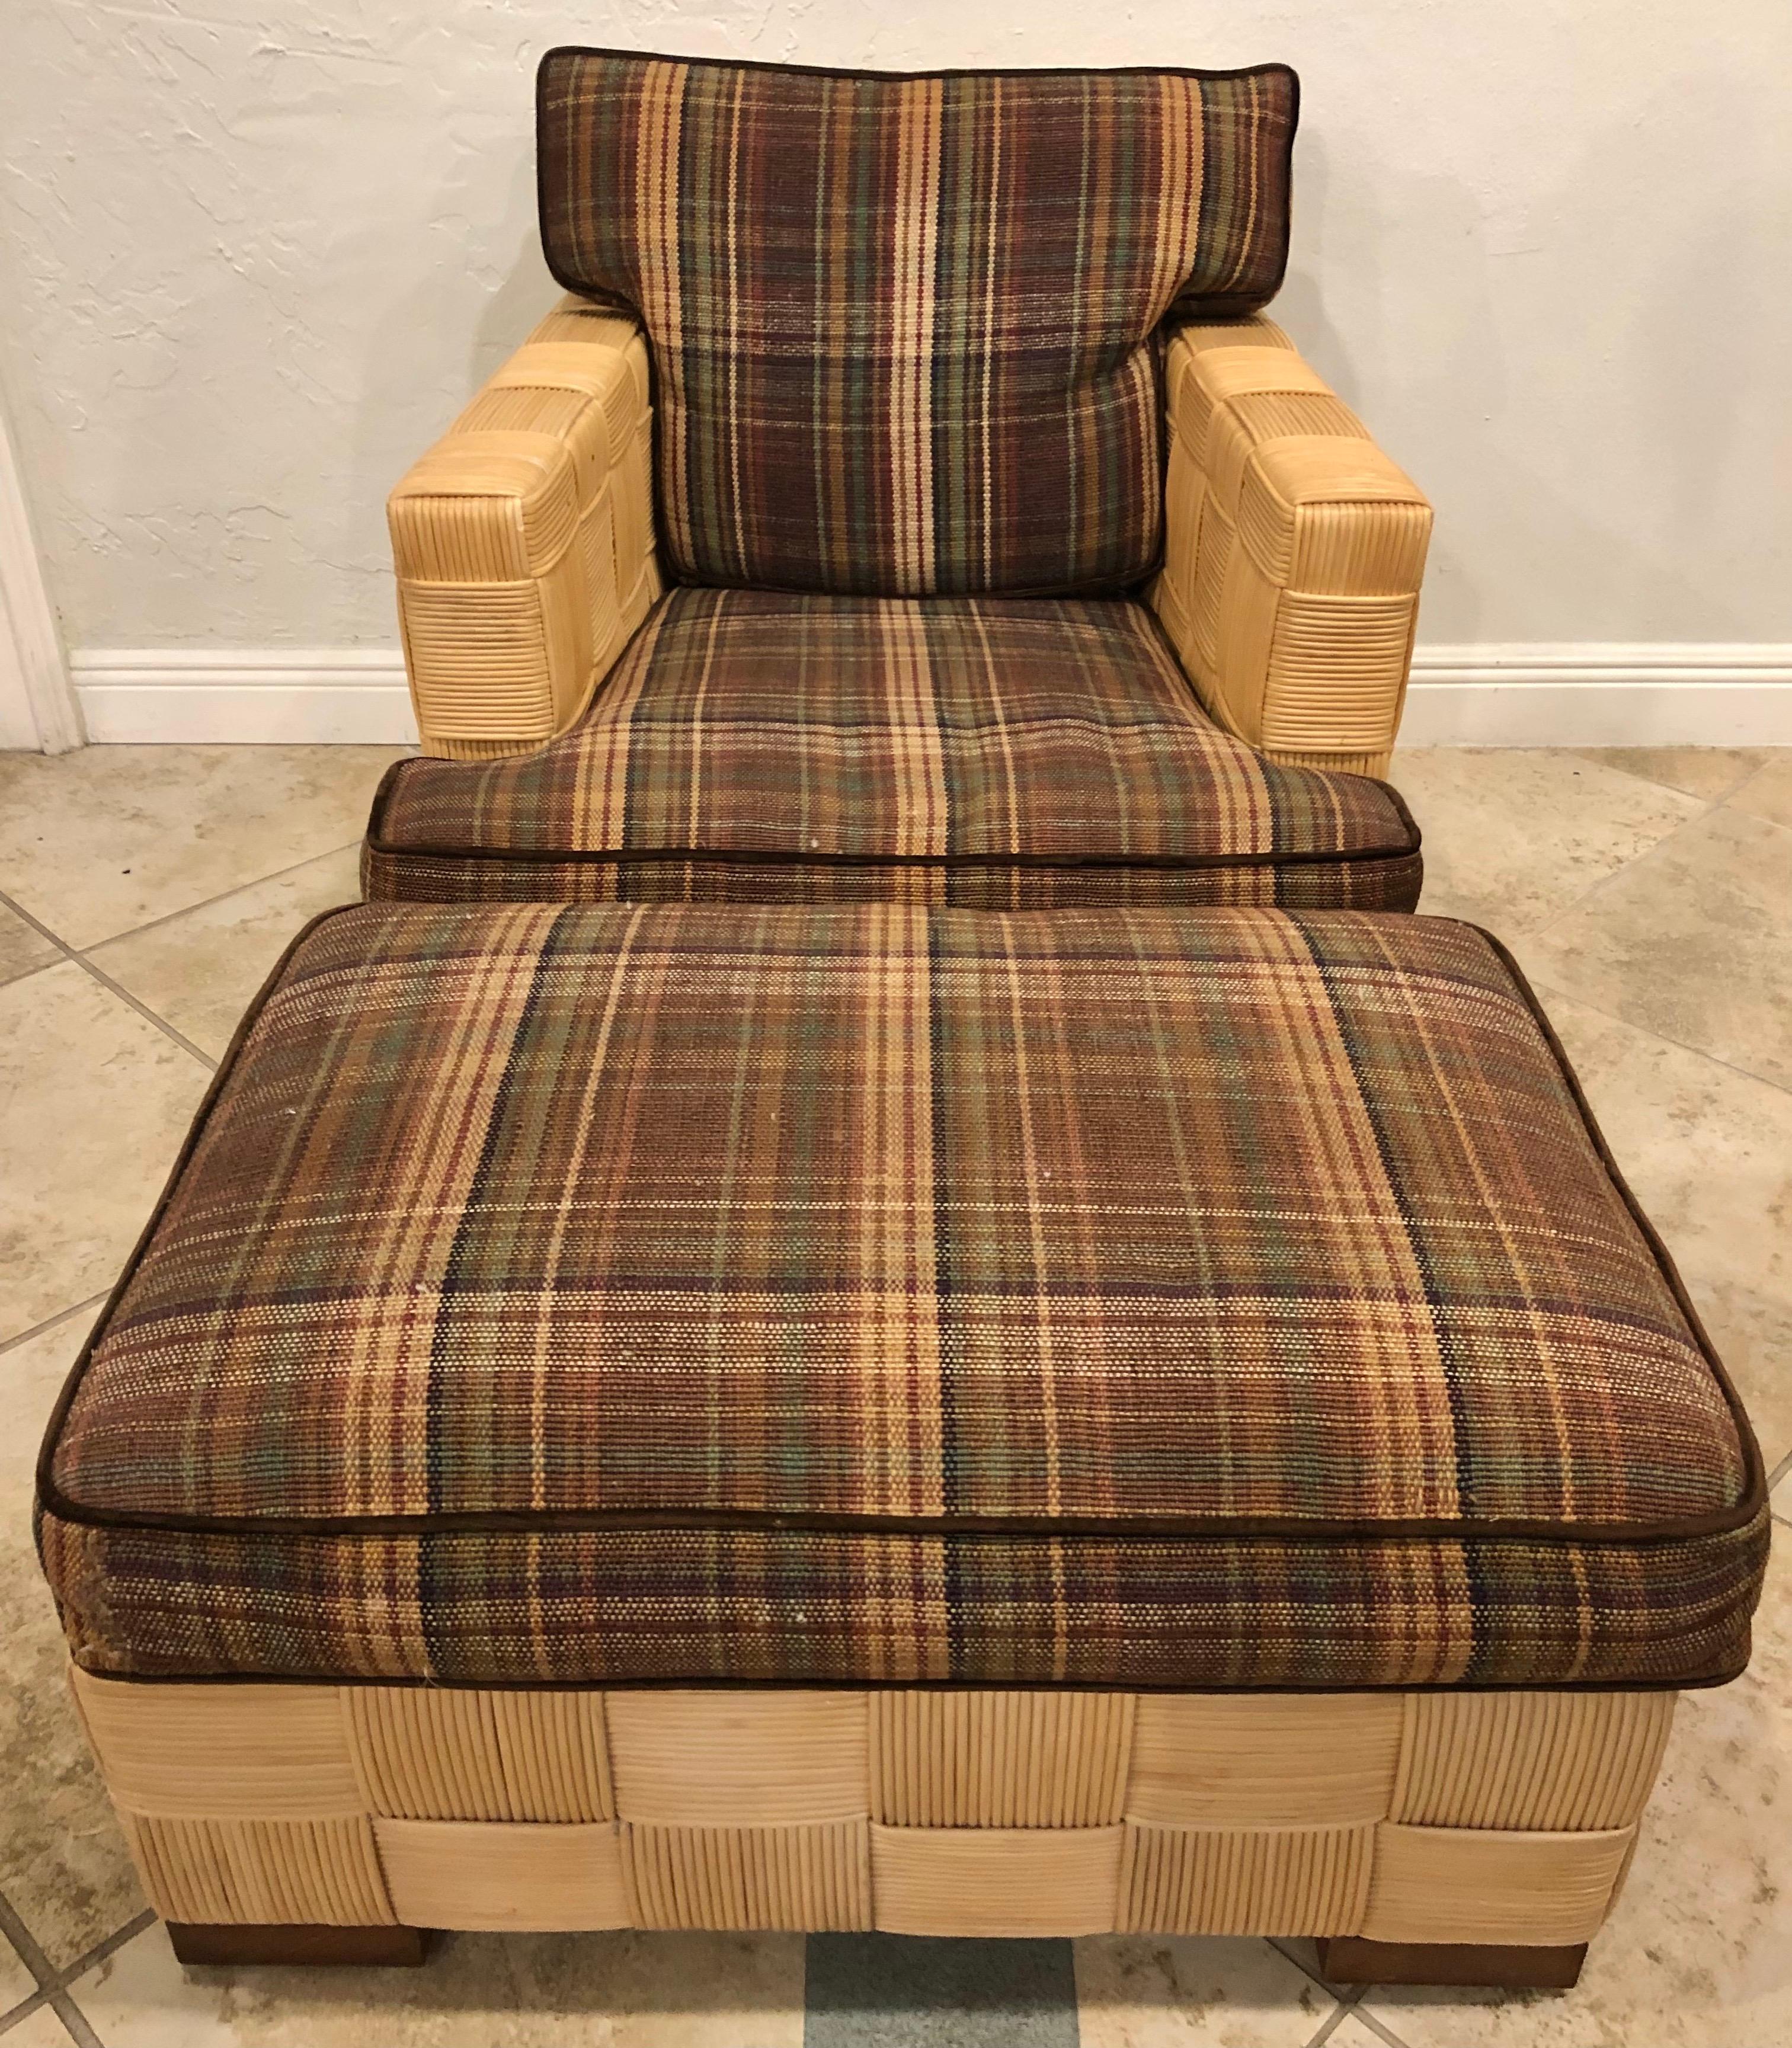 Donghia Block Island Collection lounge armchair and ottoman designed by John Hutton. Marked on bottom. Mahogany frame construction with stained mahogany accents. Very good condition. Two available.